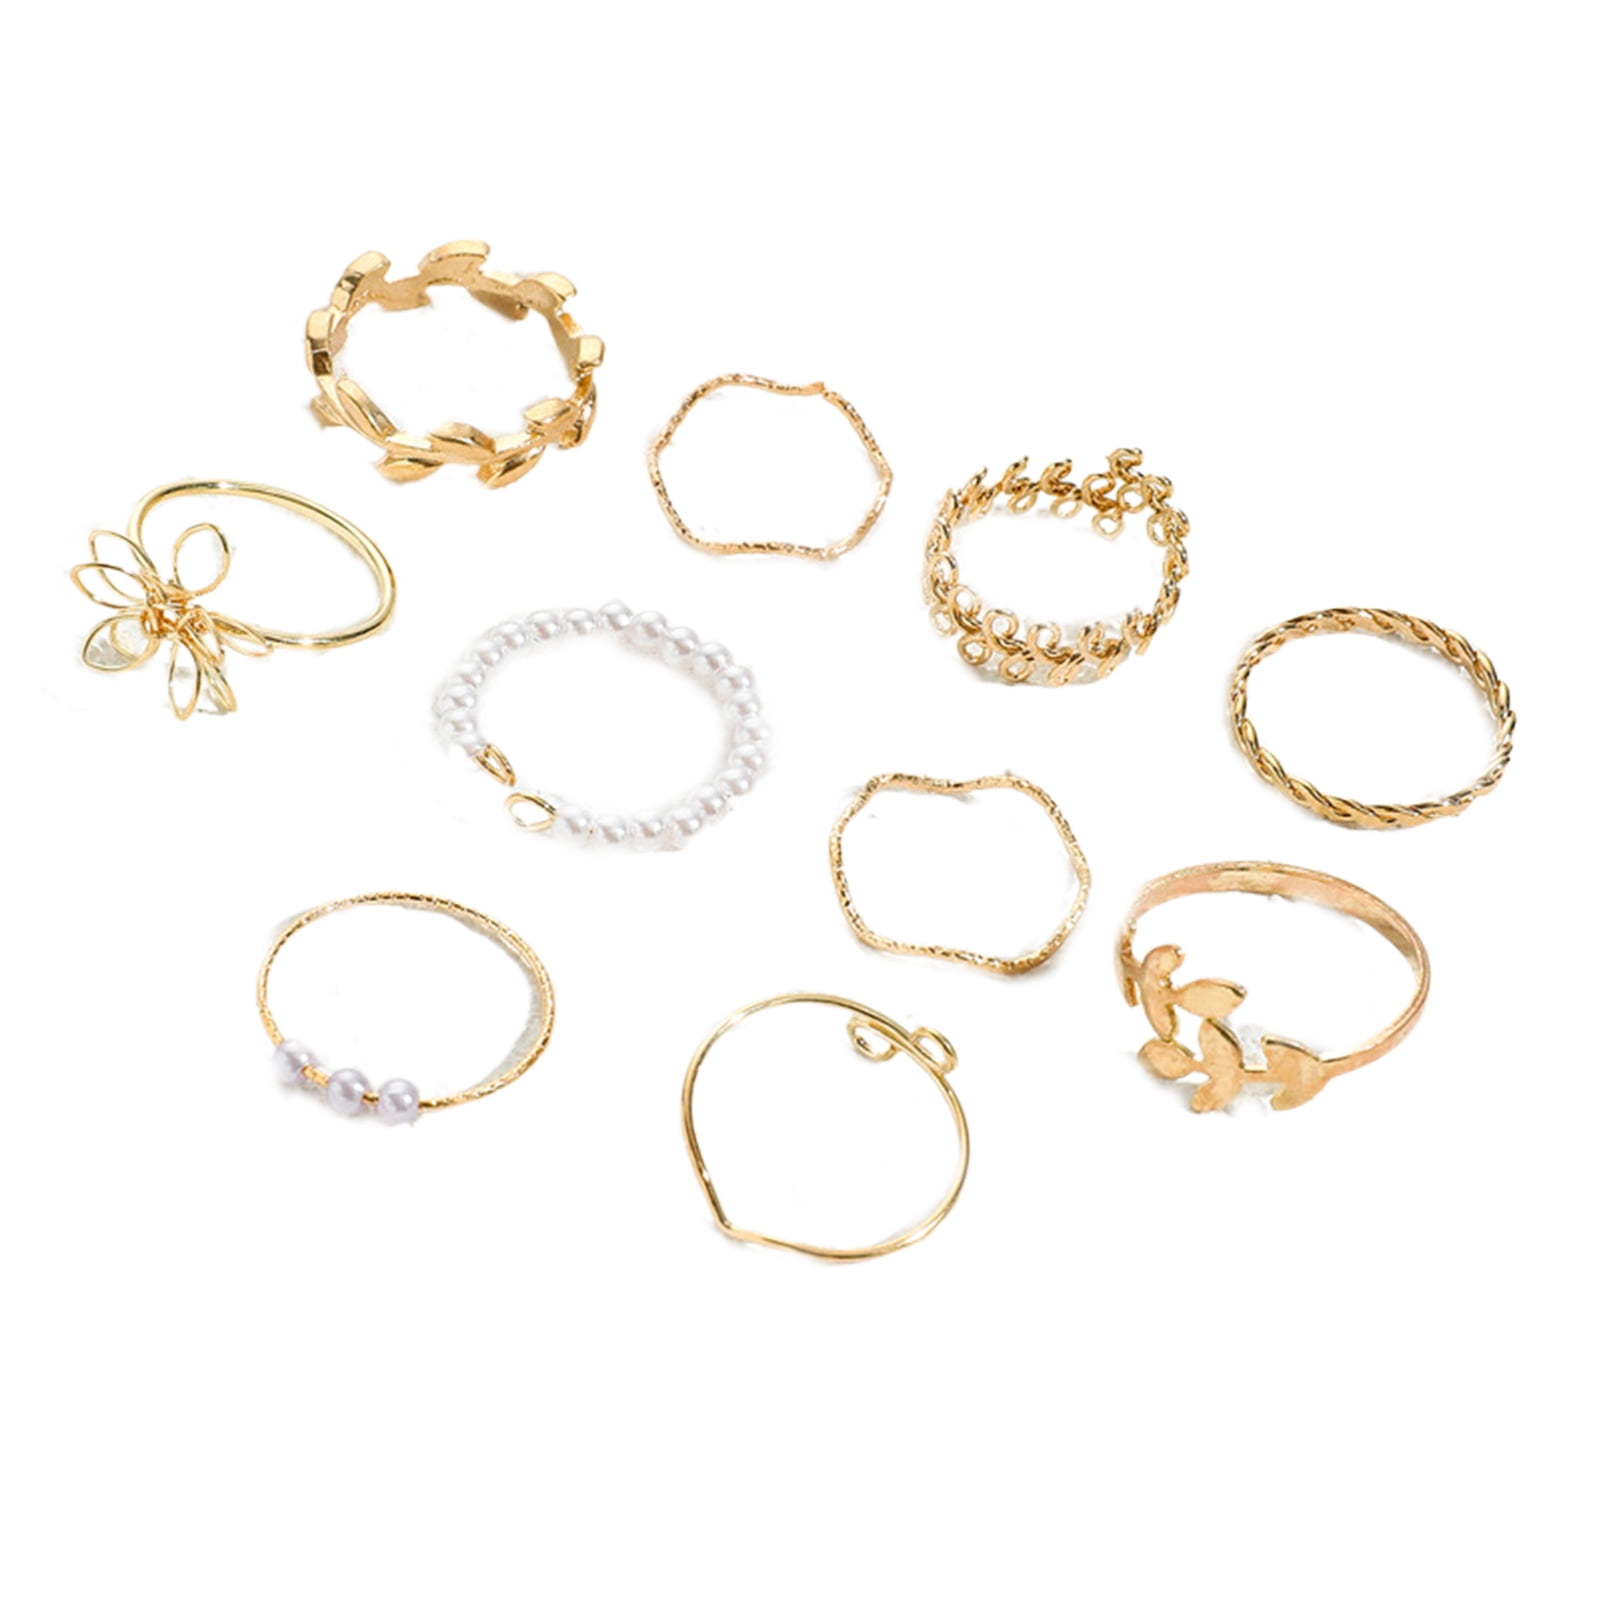 Travelwant 10Pcs Gold Knuckle Rings Set for Women Girls Snake Chain  Stacking Ring Vintage BOHO Midi Rings Size Mixed 